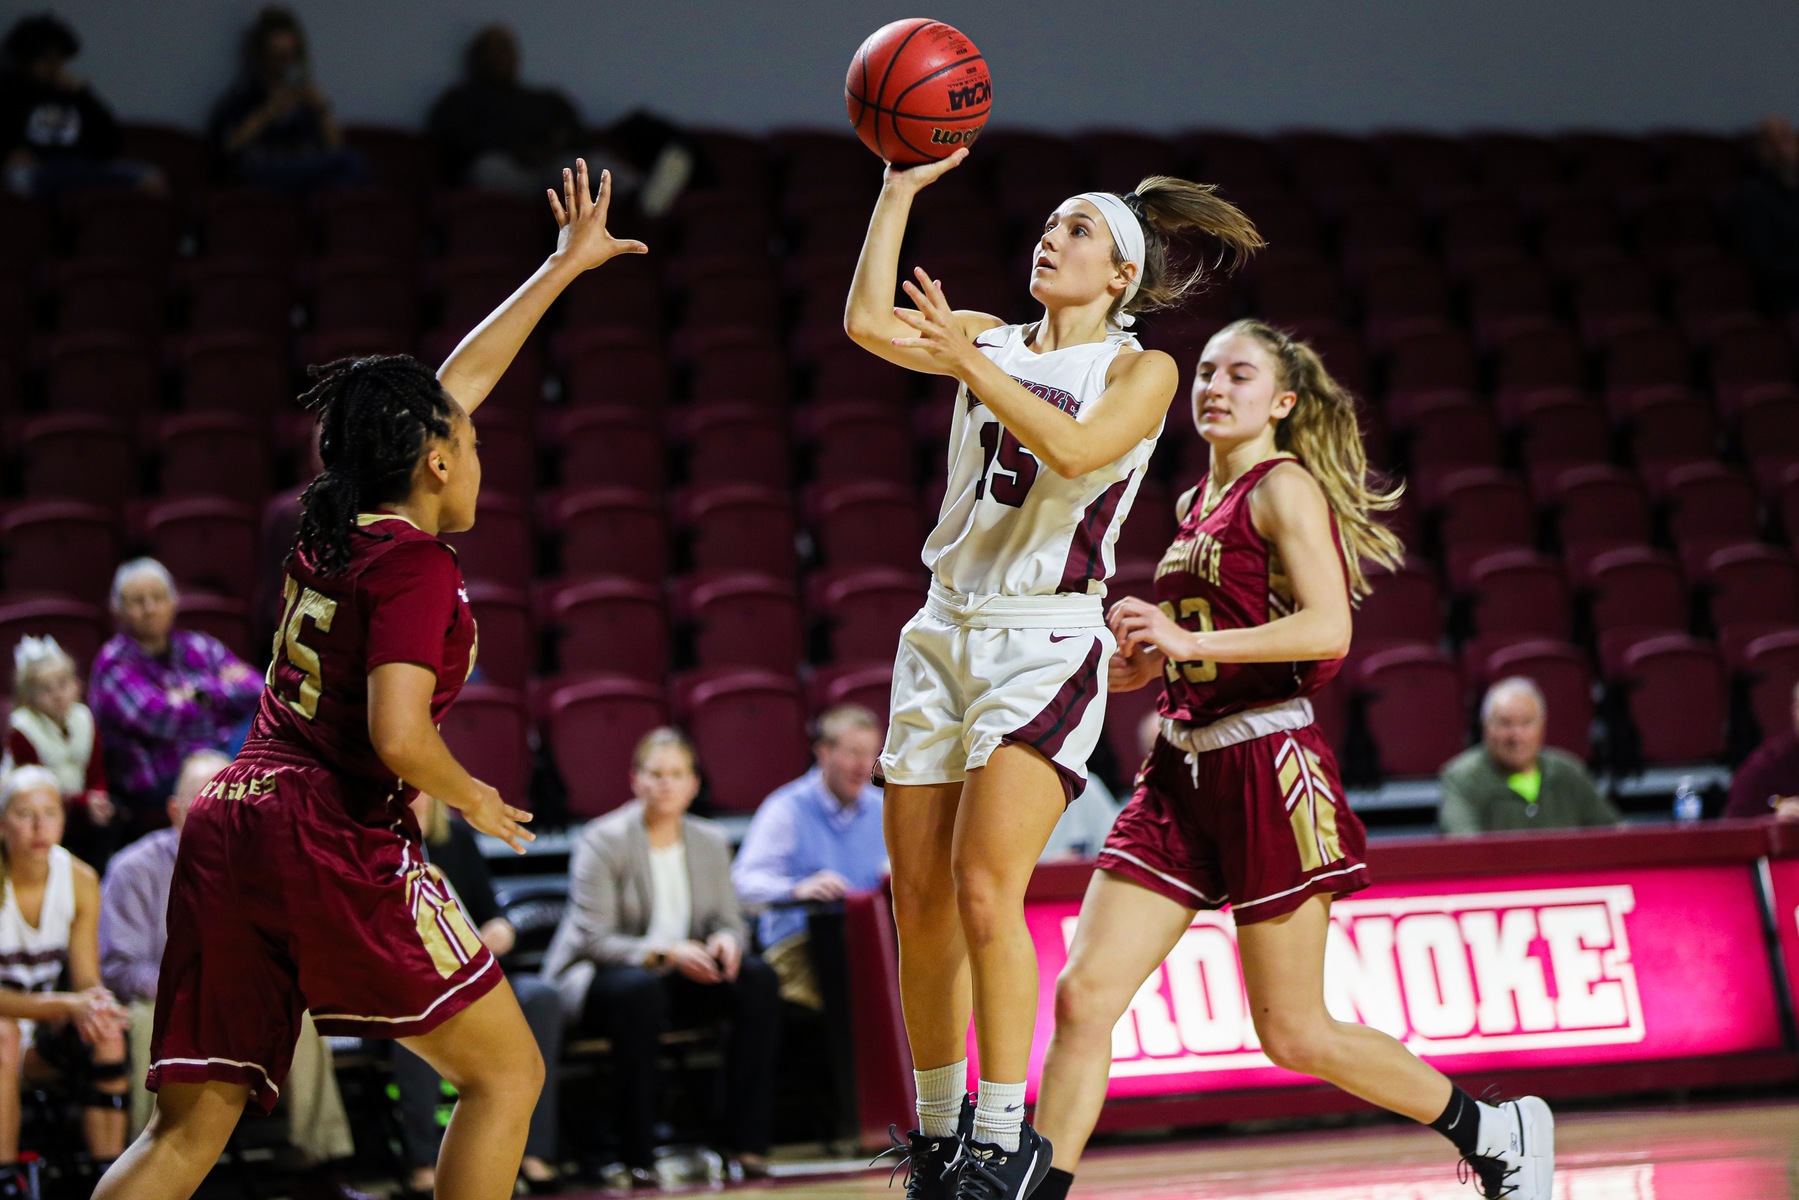 Behind 23 points from Molly Hassell Roanoke opened 2020 with a 78-73 ODAC win at home over Bridgewater.